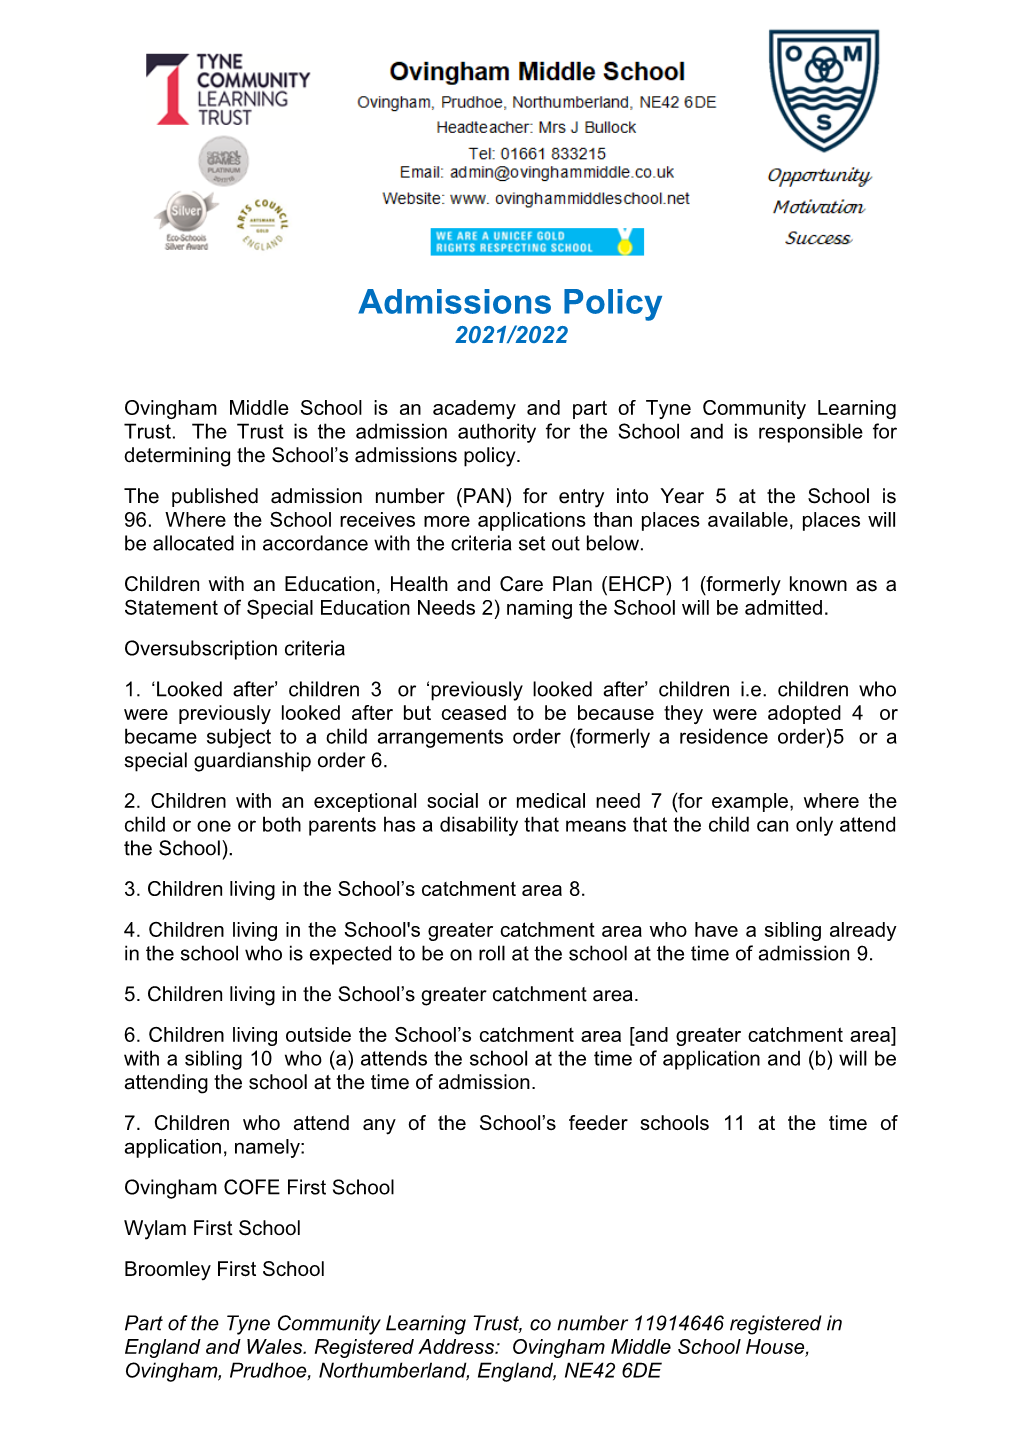 Admissions Policy 2021/2022